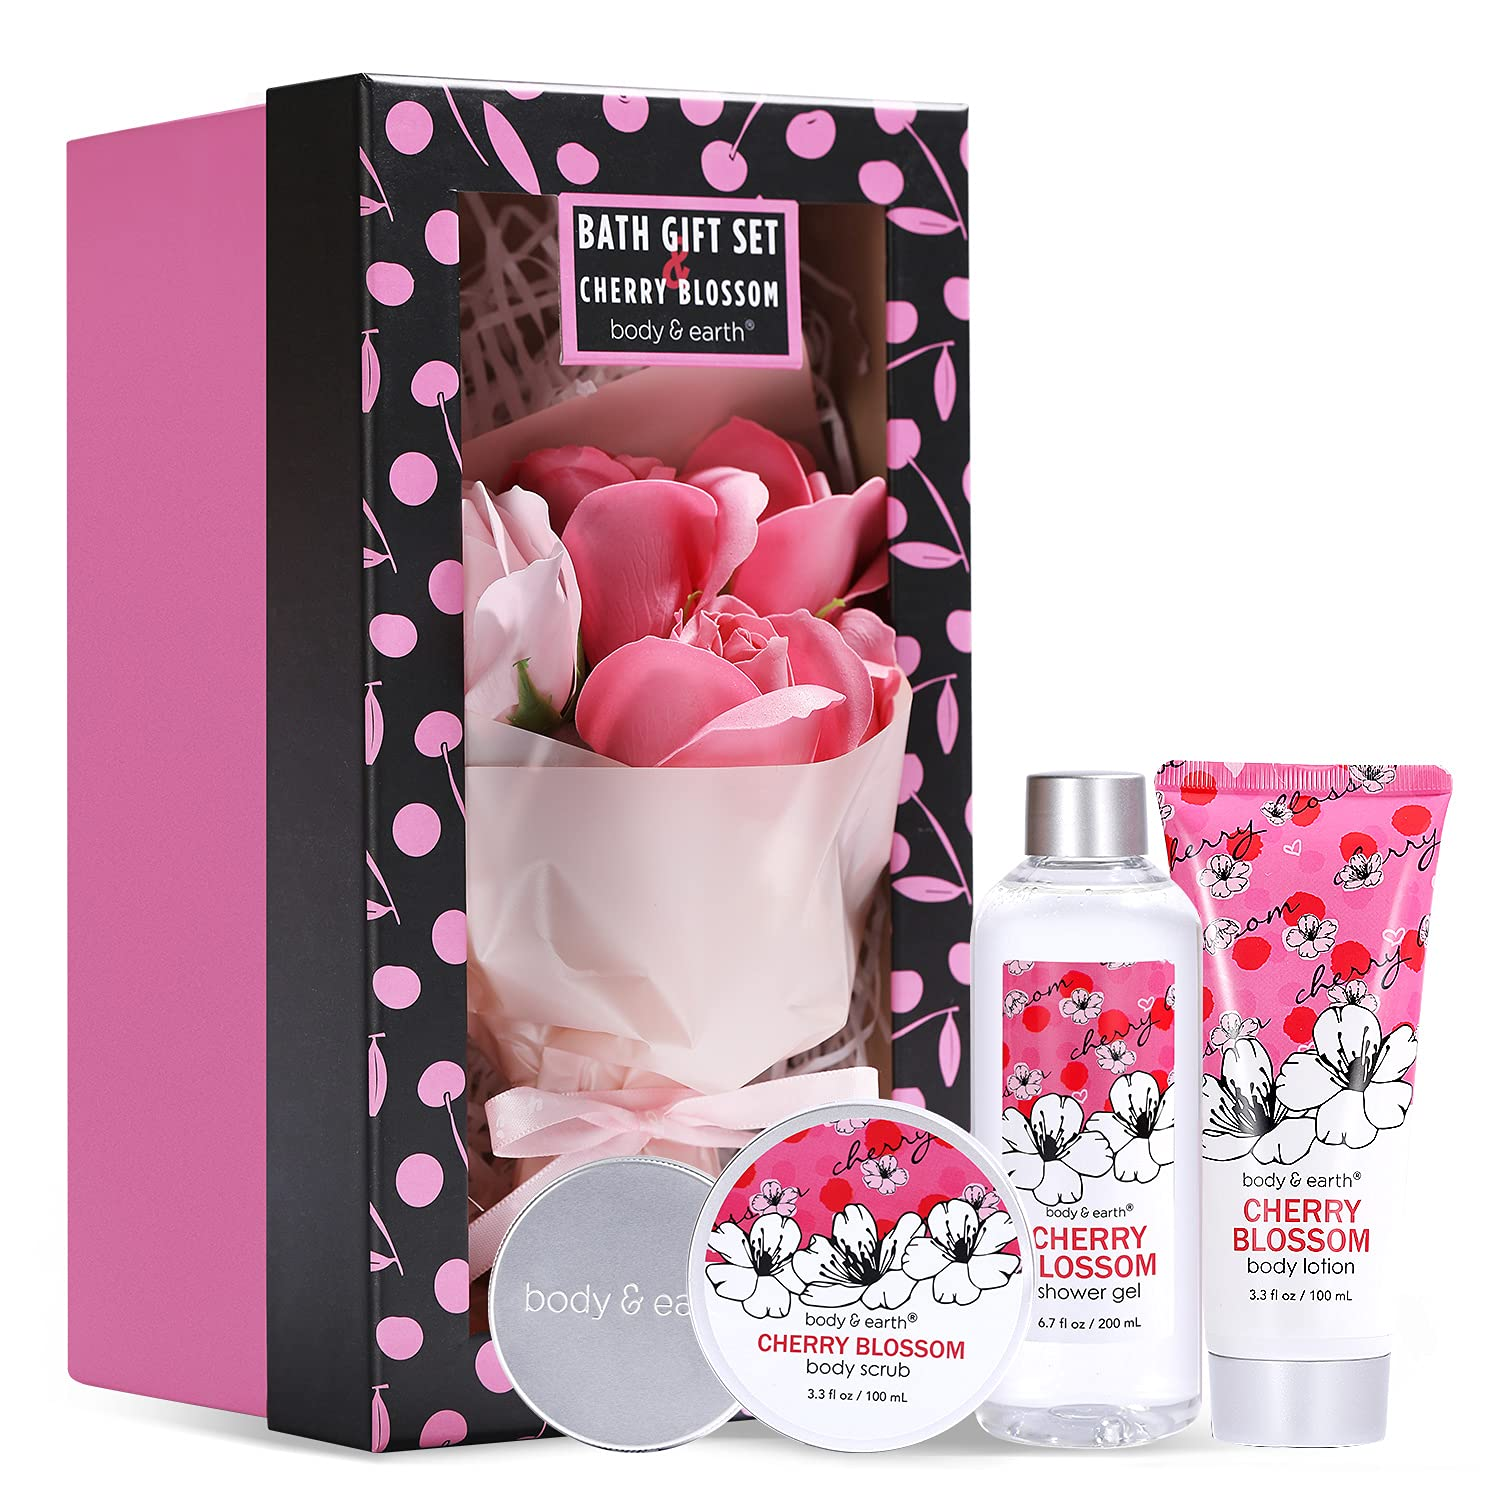 Bath and Body Gift Set for Women - Cherry Blossom Scent with Double-Layer Spa Gift Box, 5 Piece Home Spa Set Includes Shower Gel, Body Scrub, Body Lotion, Hand Soap, Rose Flower, Bath Set Gift for Her